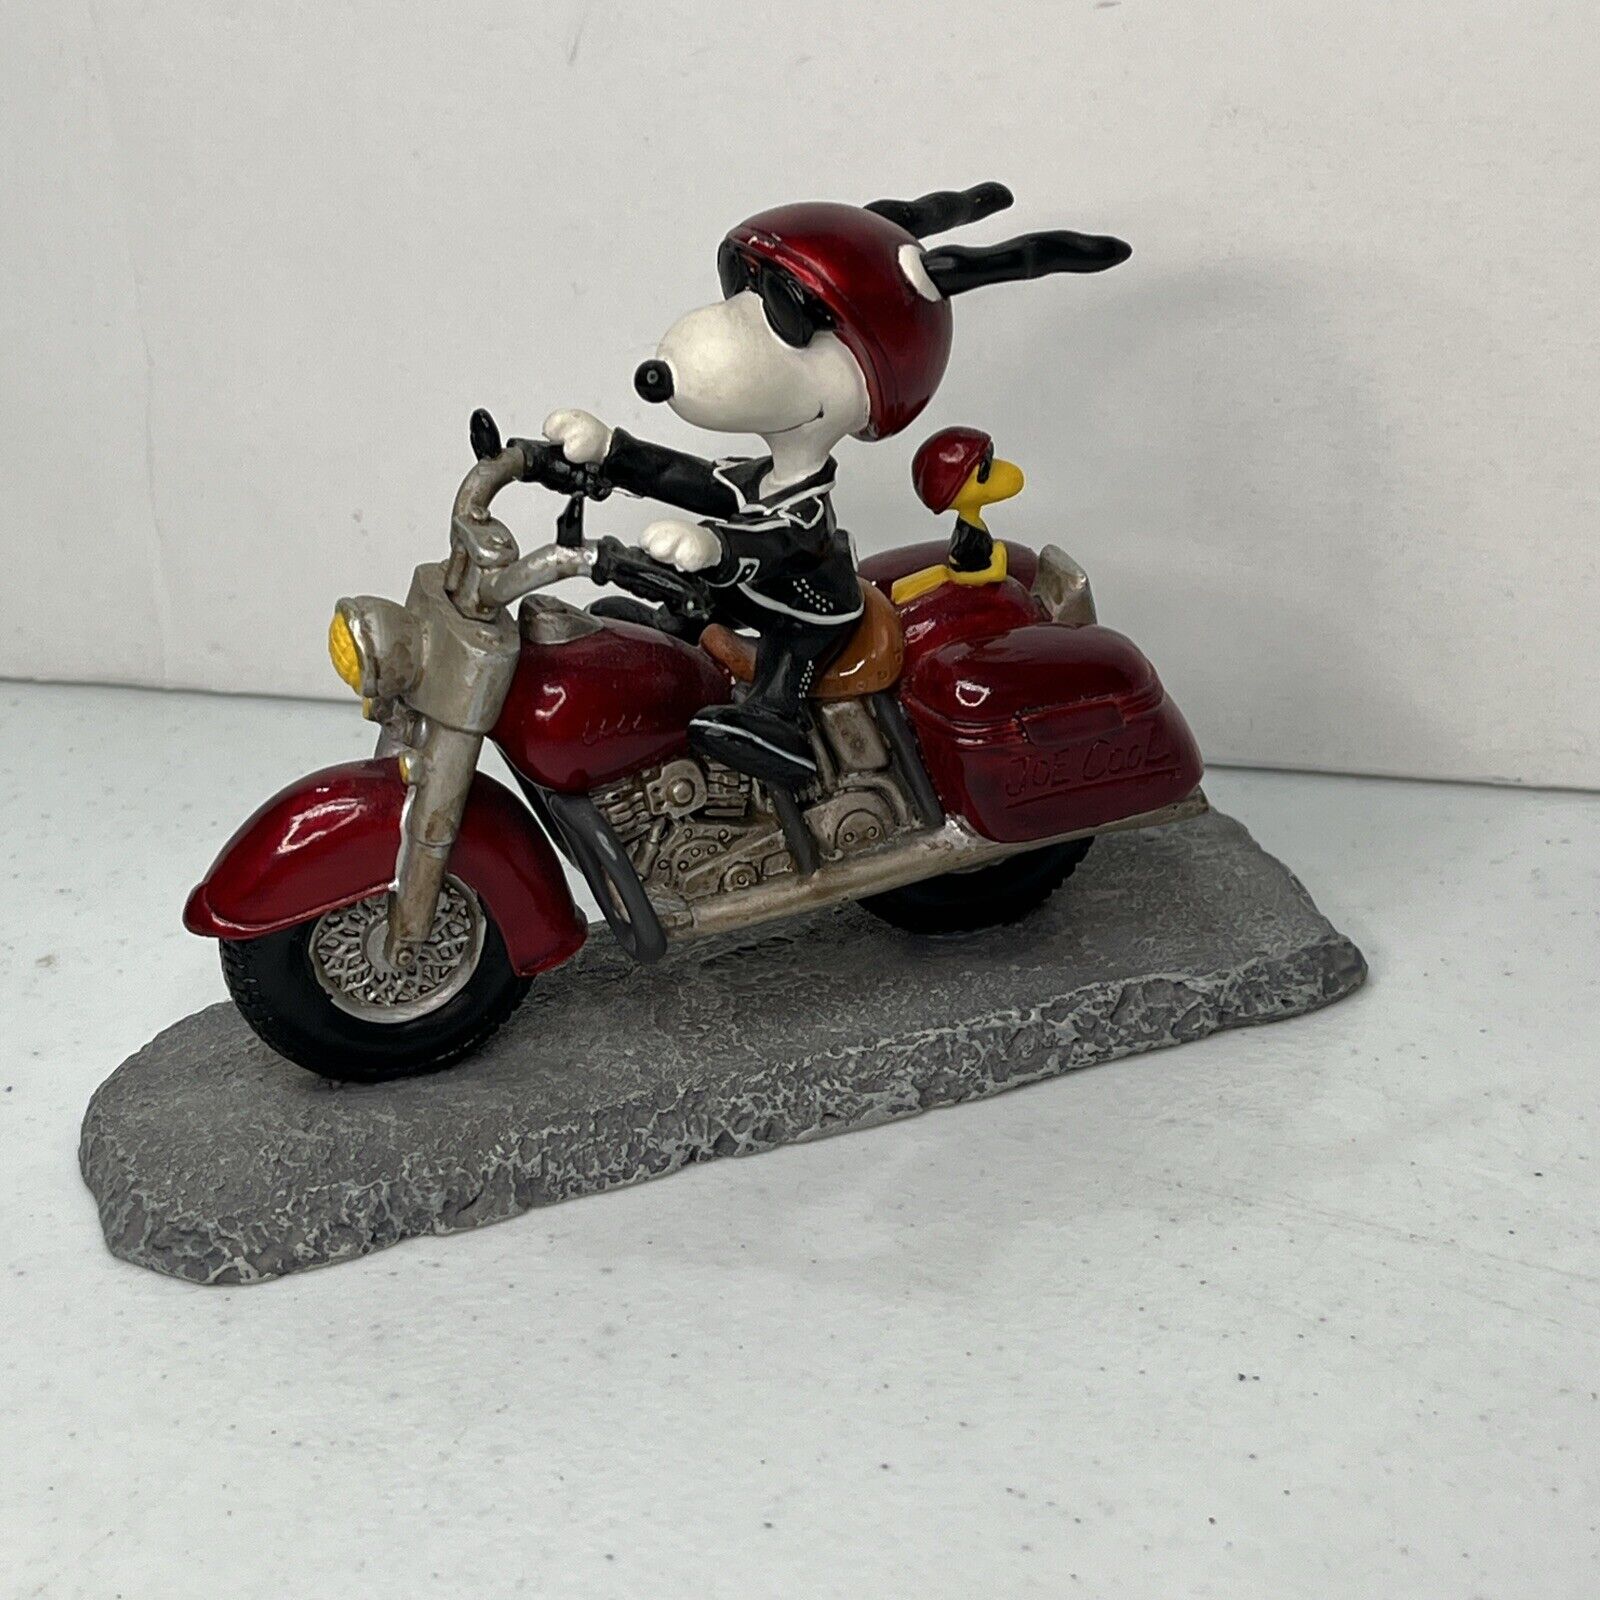 Peanut Collections Joe Cool on Motorcycle Woodstock Snoopy Westland No. 8224